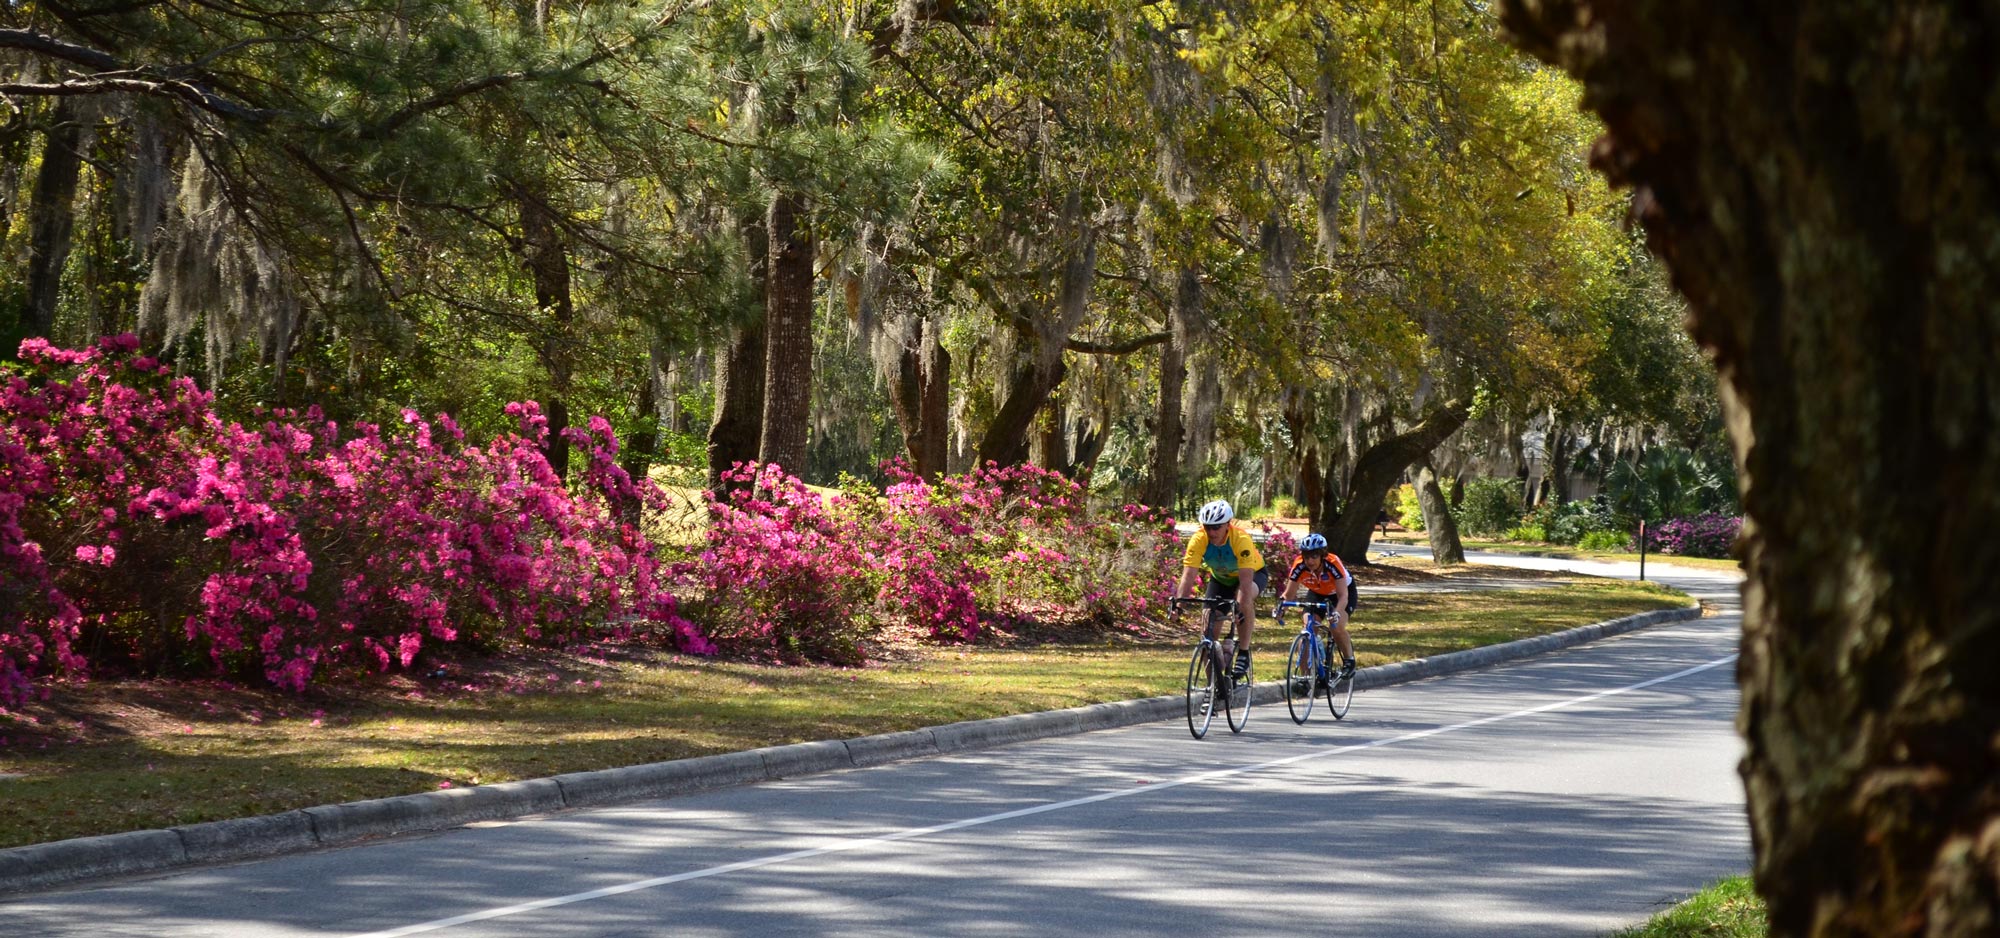 A couple rides bicycles through beautiful scenic landscape at The Landings